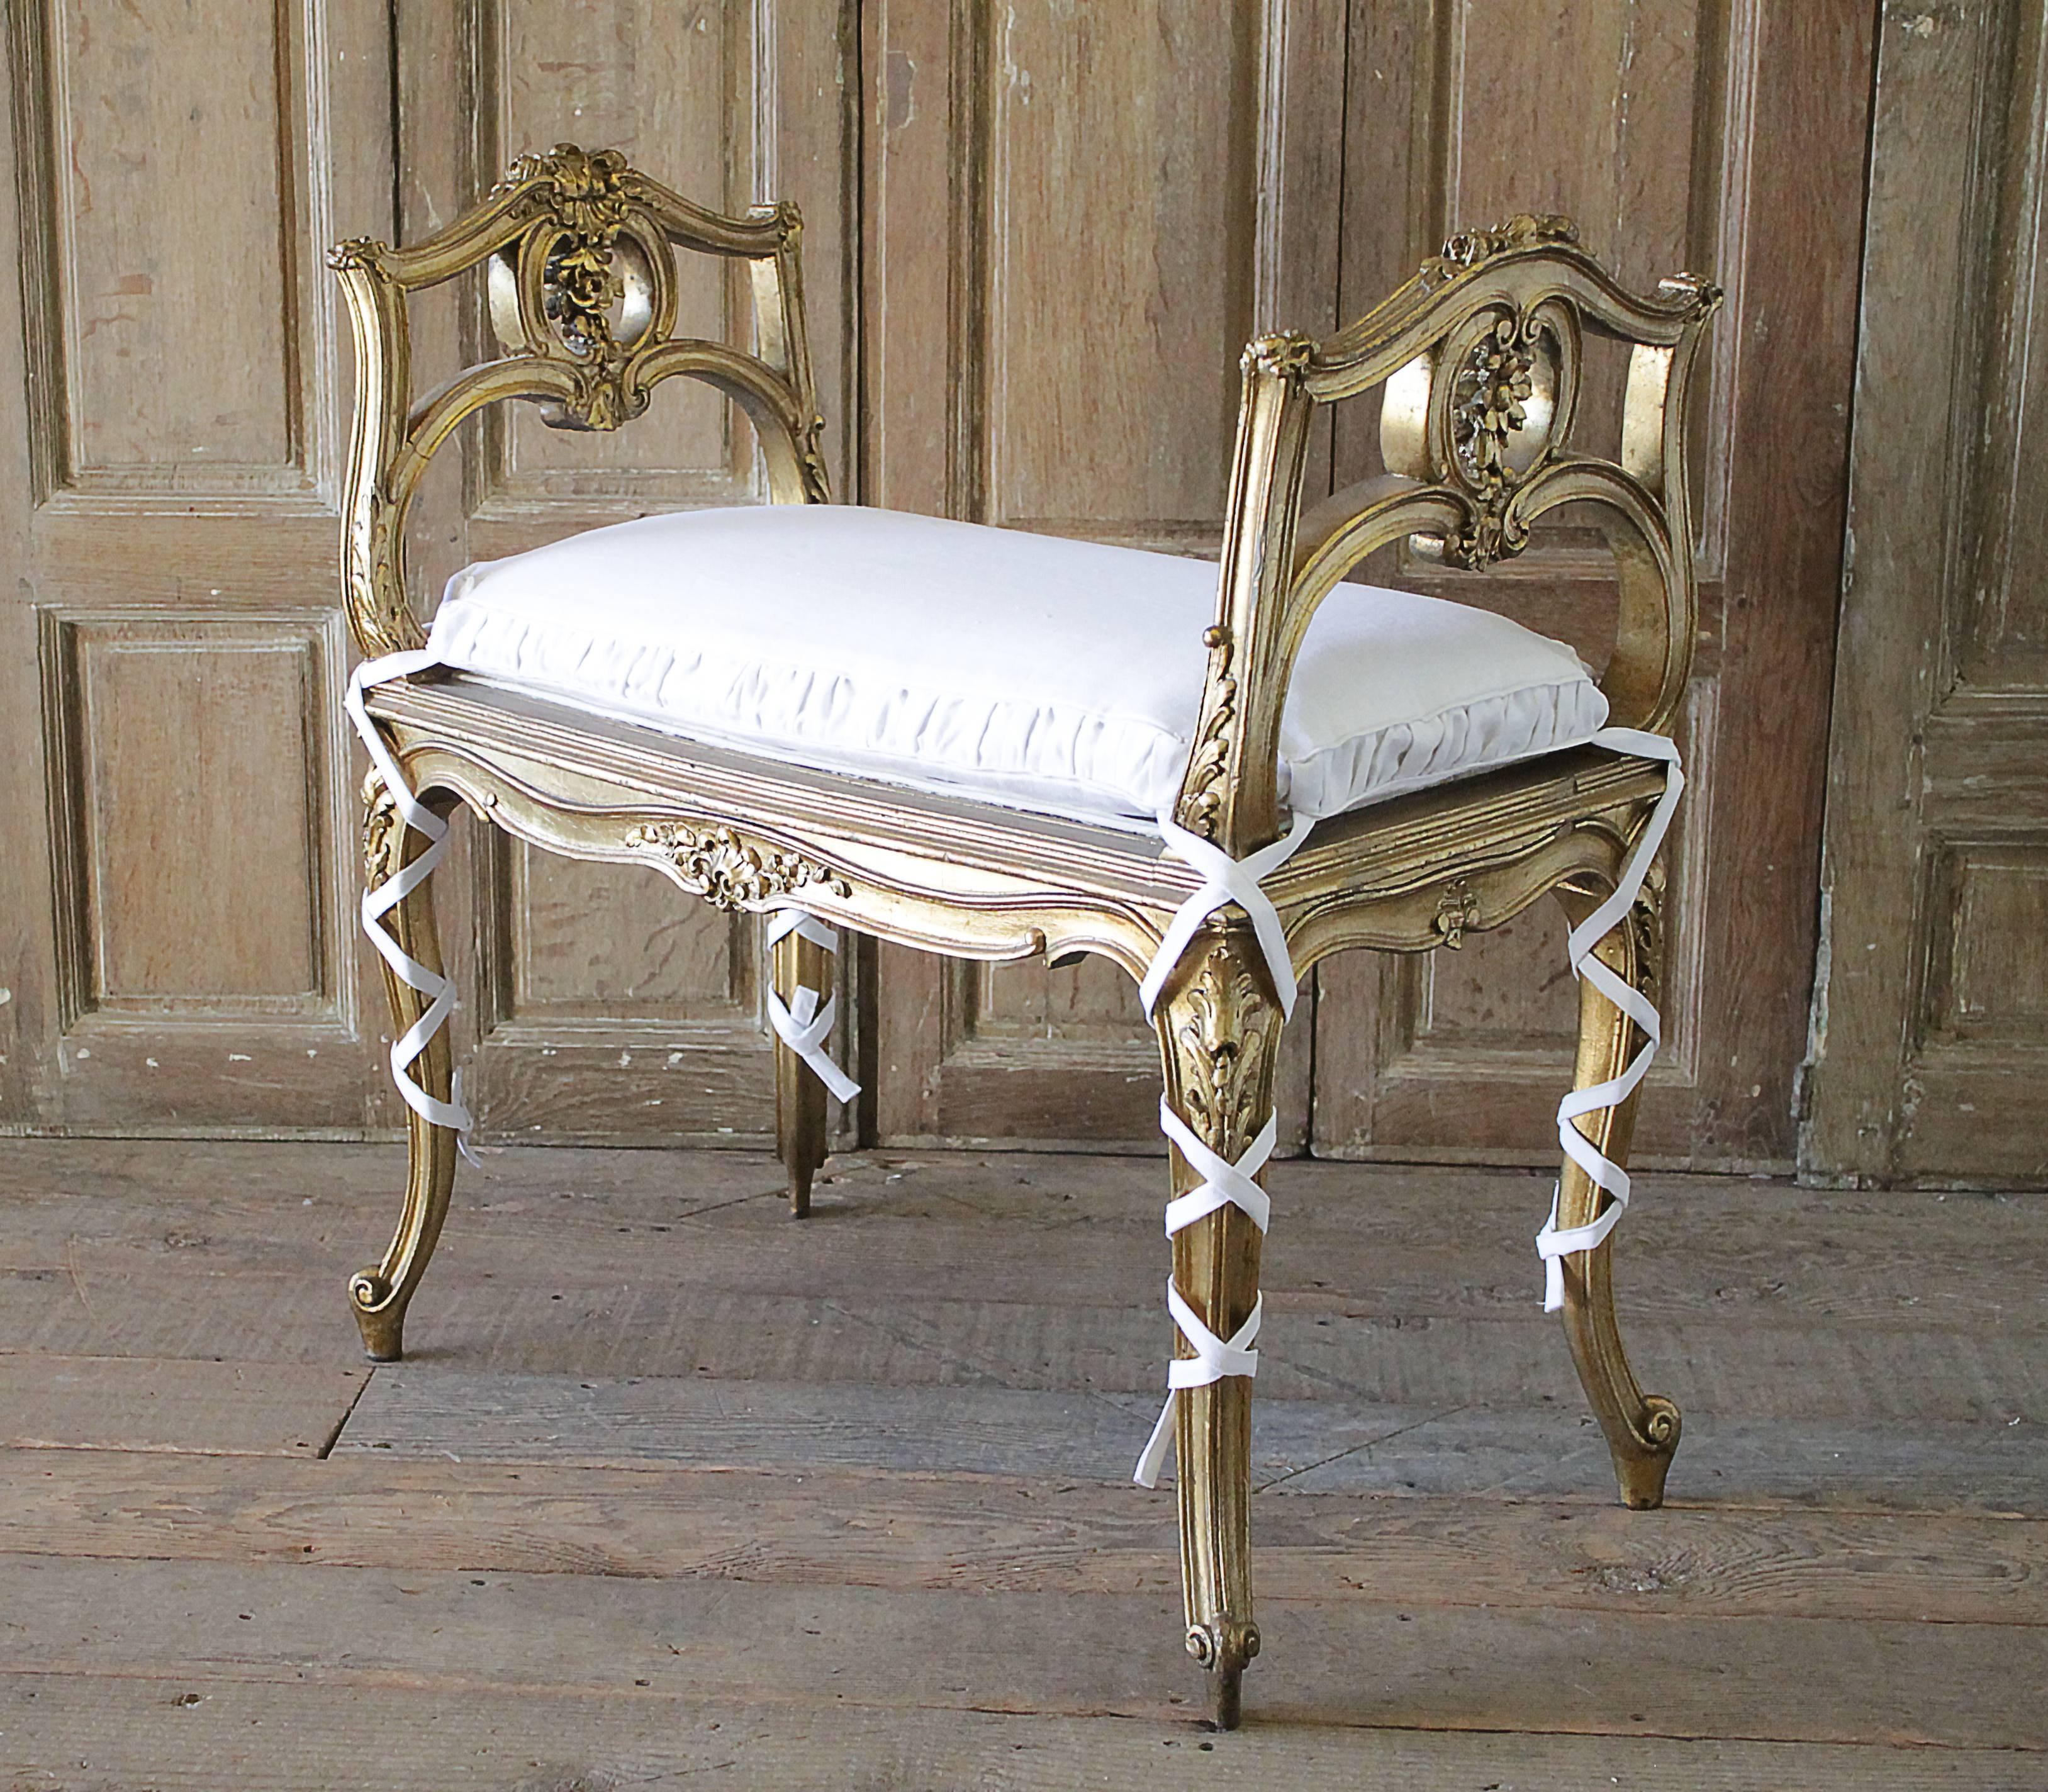 20th Century Carved Giltwood Bench with Linen Slip Covered Cushion
Original gilt finish, with subtle areas of patina, Louis XV style carved legs, and rococo carved sides, with floral motifs.
We added a custom made slip covered cushion with rusched